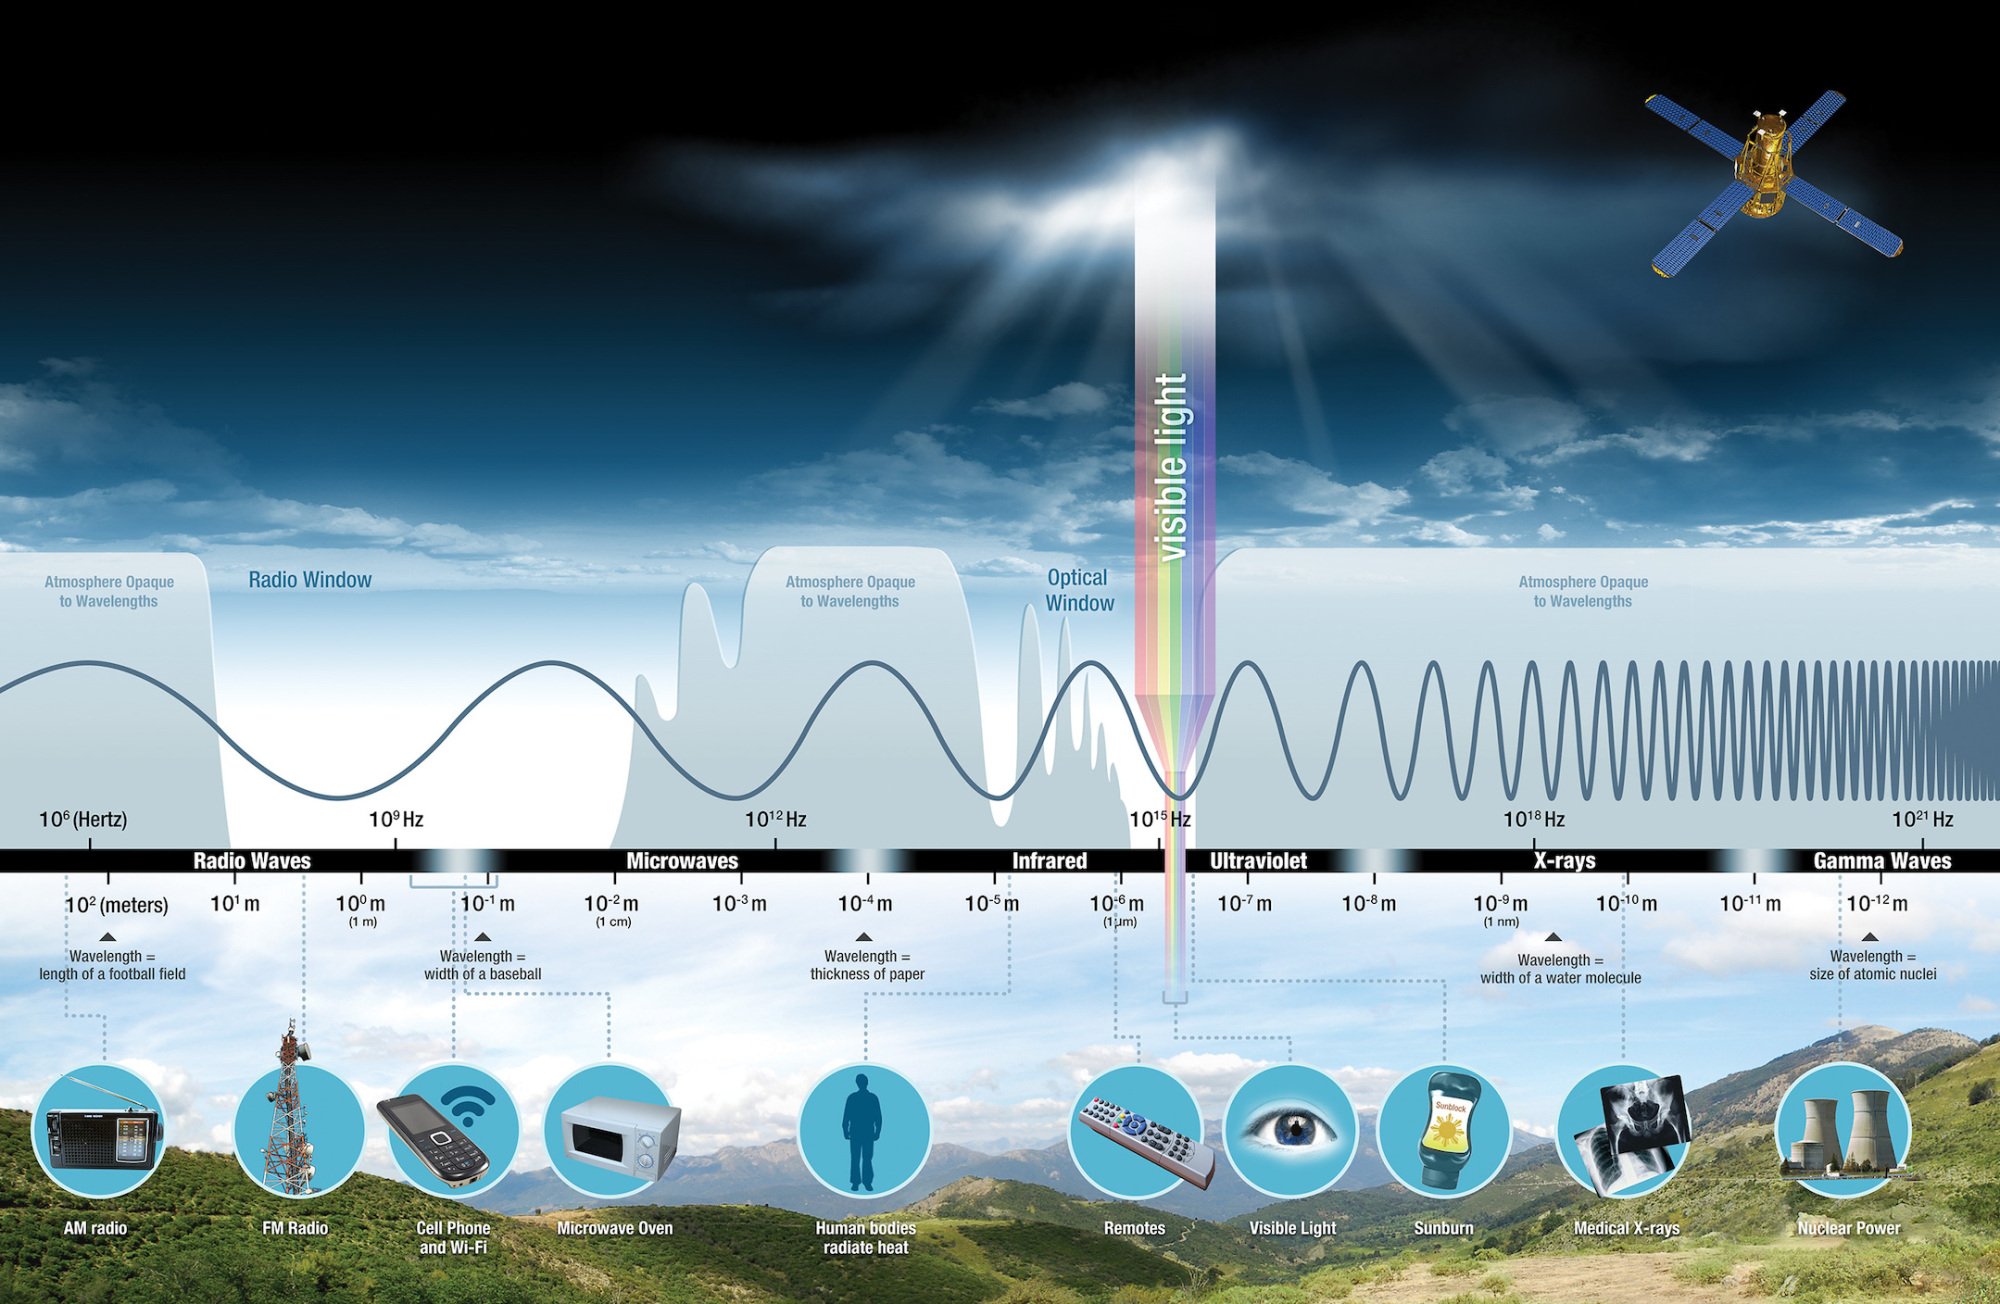 The electromagnetic spectrum showing all the wavelengths of light, such as visible light, infrared, ultraviolet, and beyond.